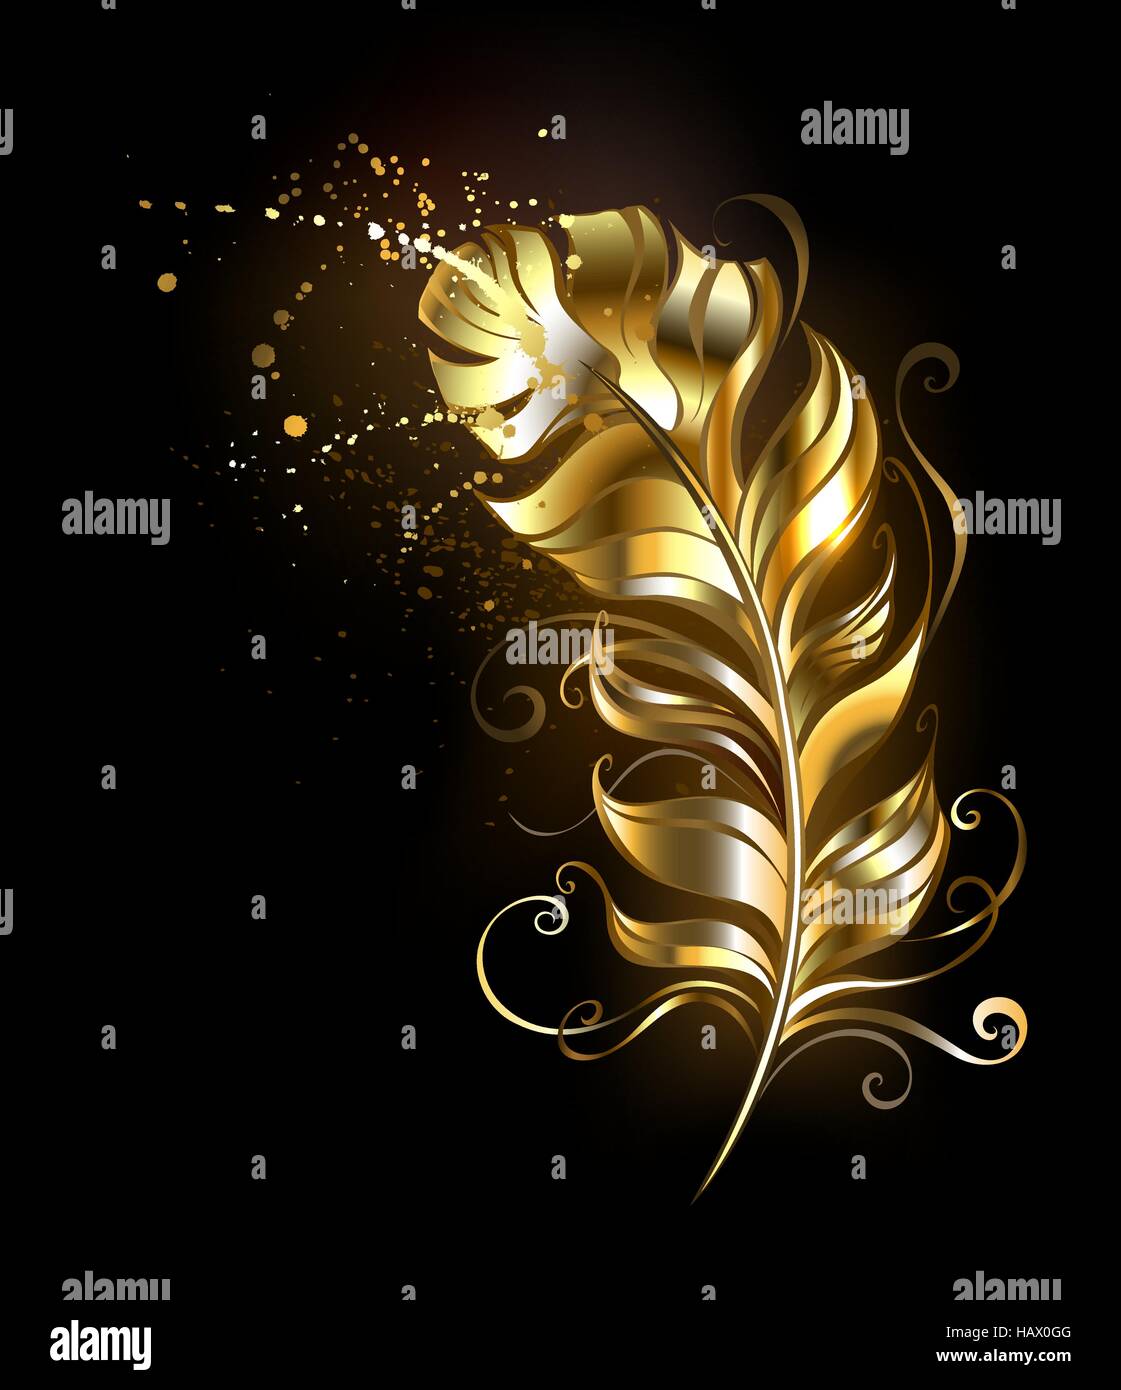 Fluffy feather of shiny gold on a black background. Stock Vector